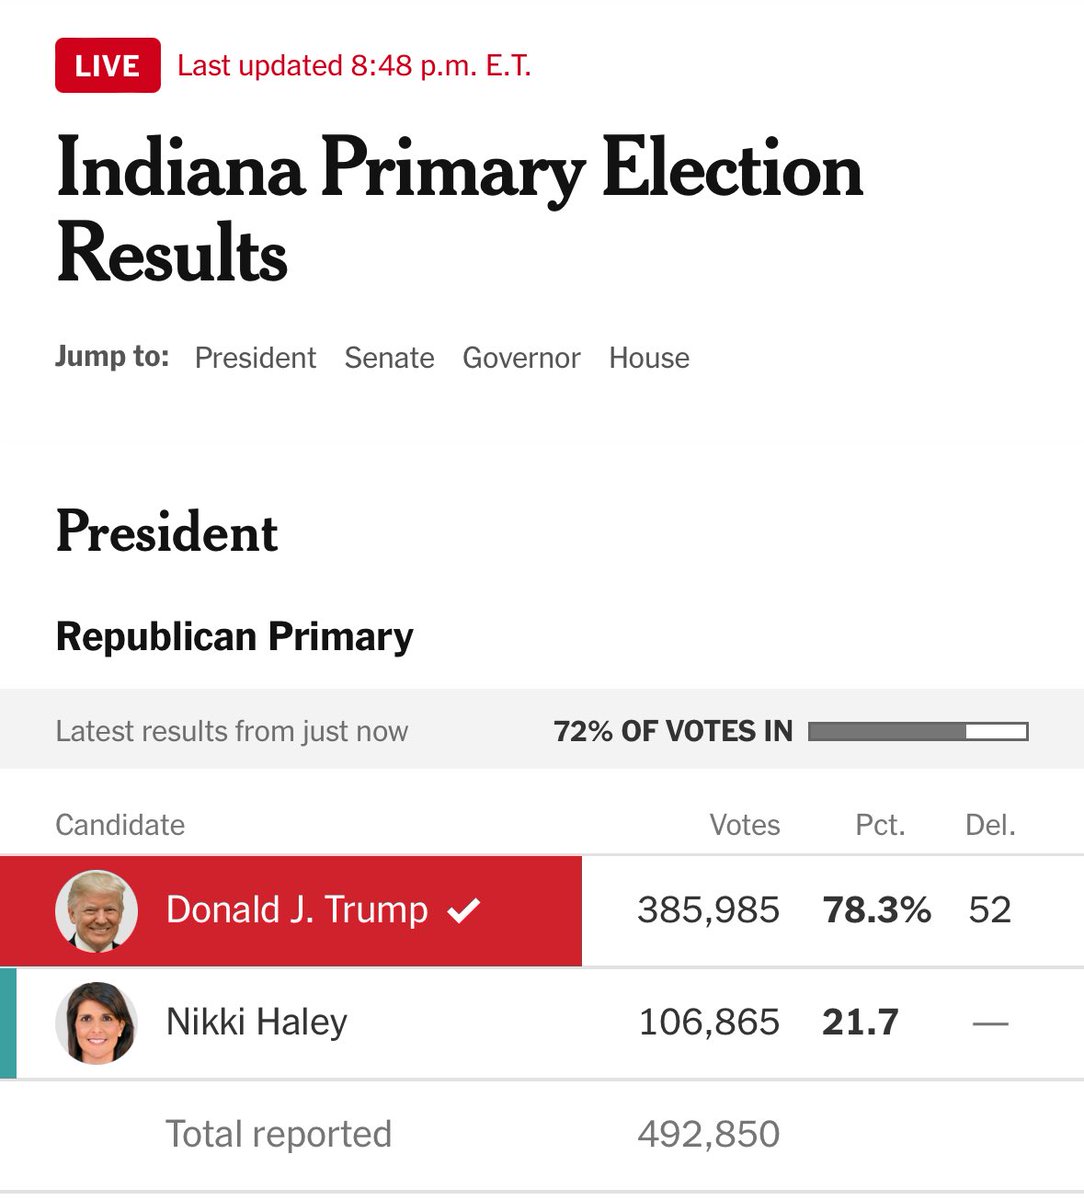 Nikki Haley dropped out 2 months ago. Tonight she’s picking up over 100,000 votes and 22% of the primary vote in *Indiana* Trump has a GOP base problem.